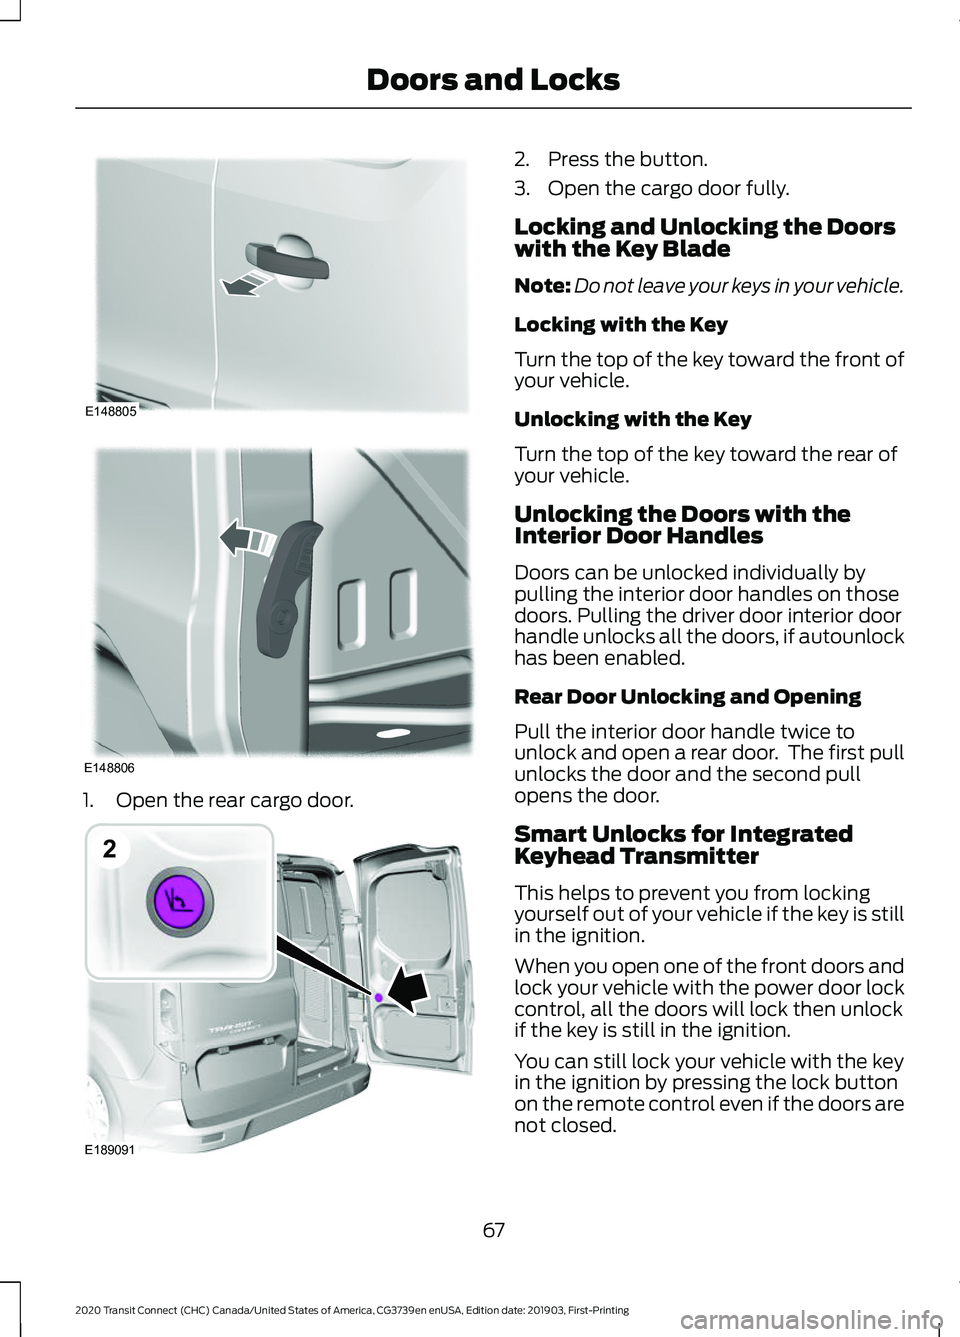 FORD TRANSIT CONNECT 2020  Owners Manual 1. Open the rear cargo door. 2. Press the button.
3. Open the cargo door fully.
Locking and Unlocking the Doors
with the Key Blade
Note:
Do not leave your keys in your vehicle.
Locking with the Key
Tu